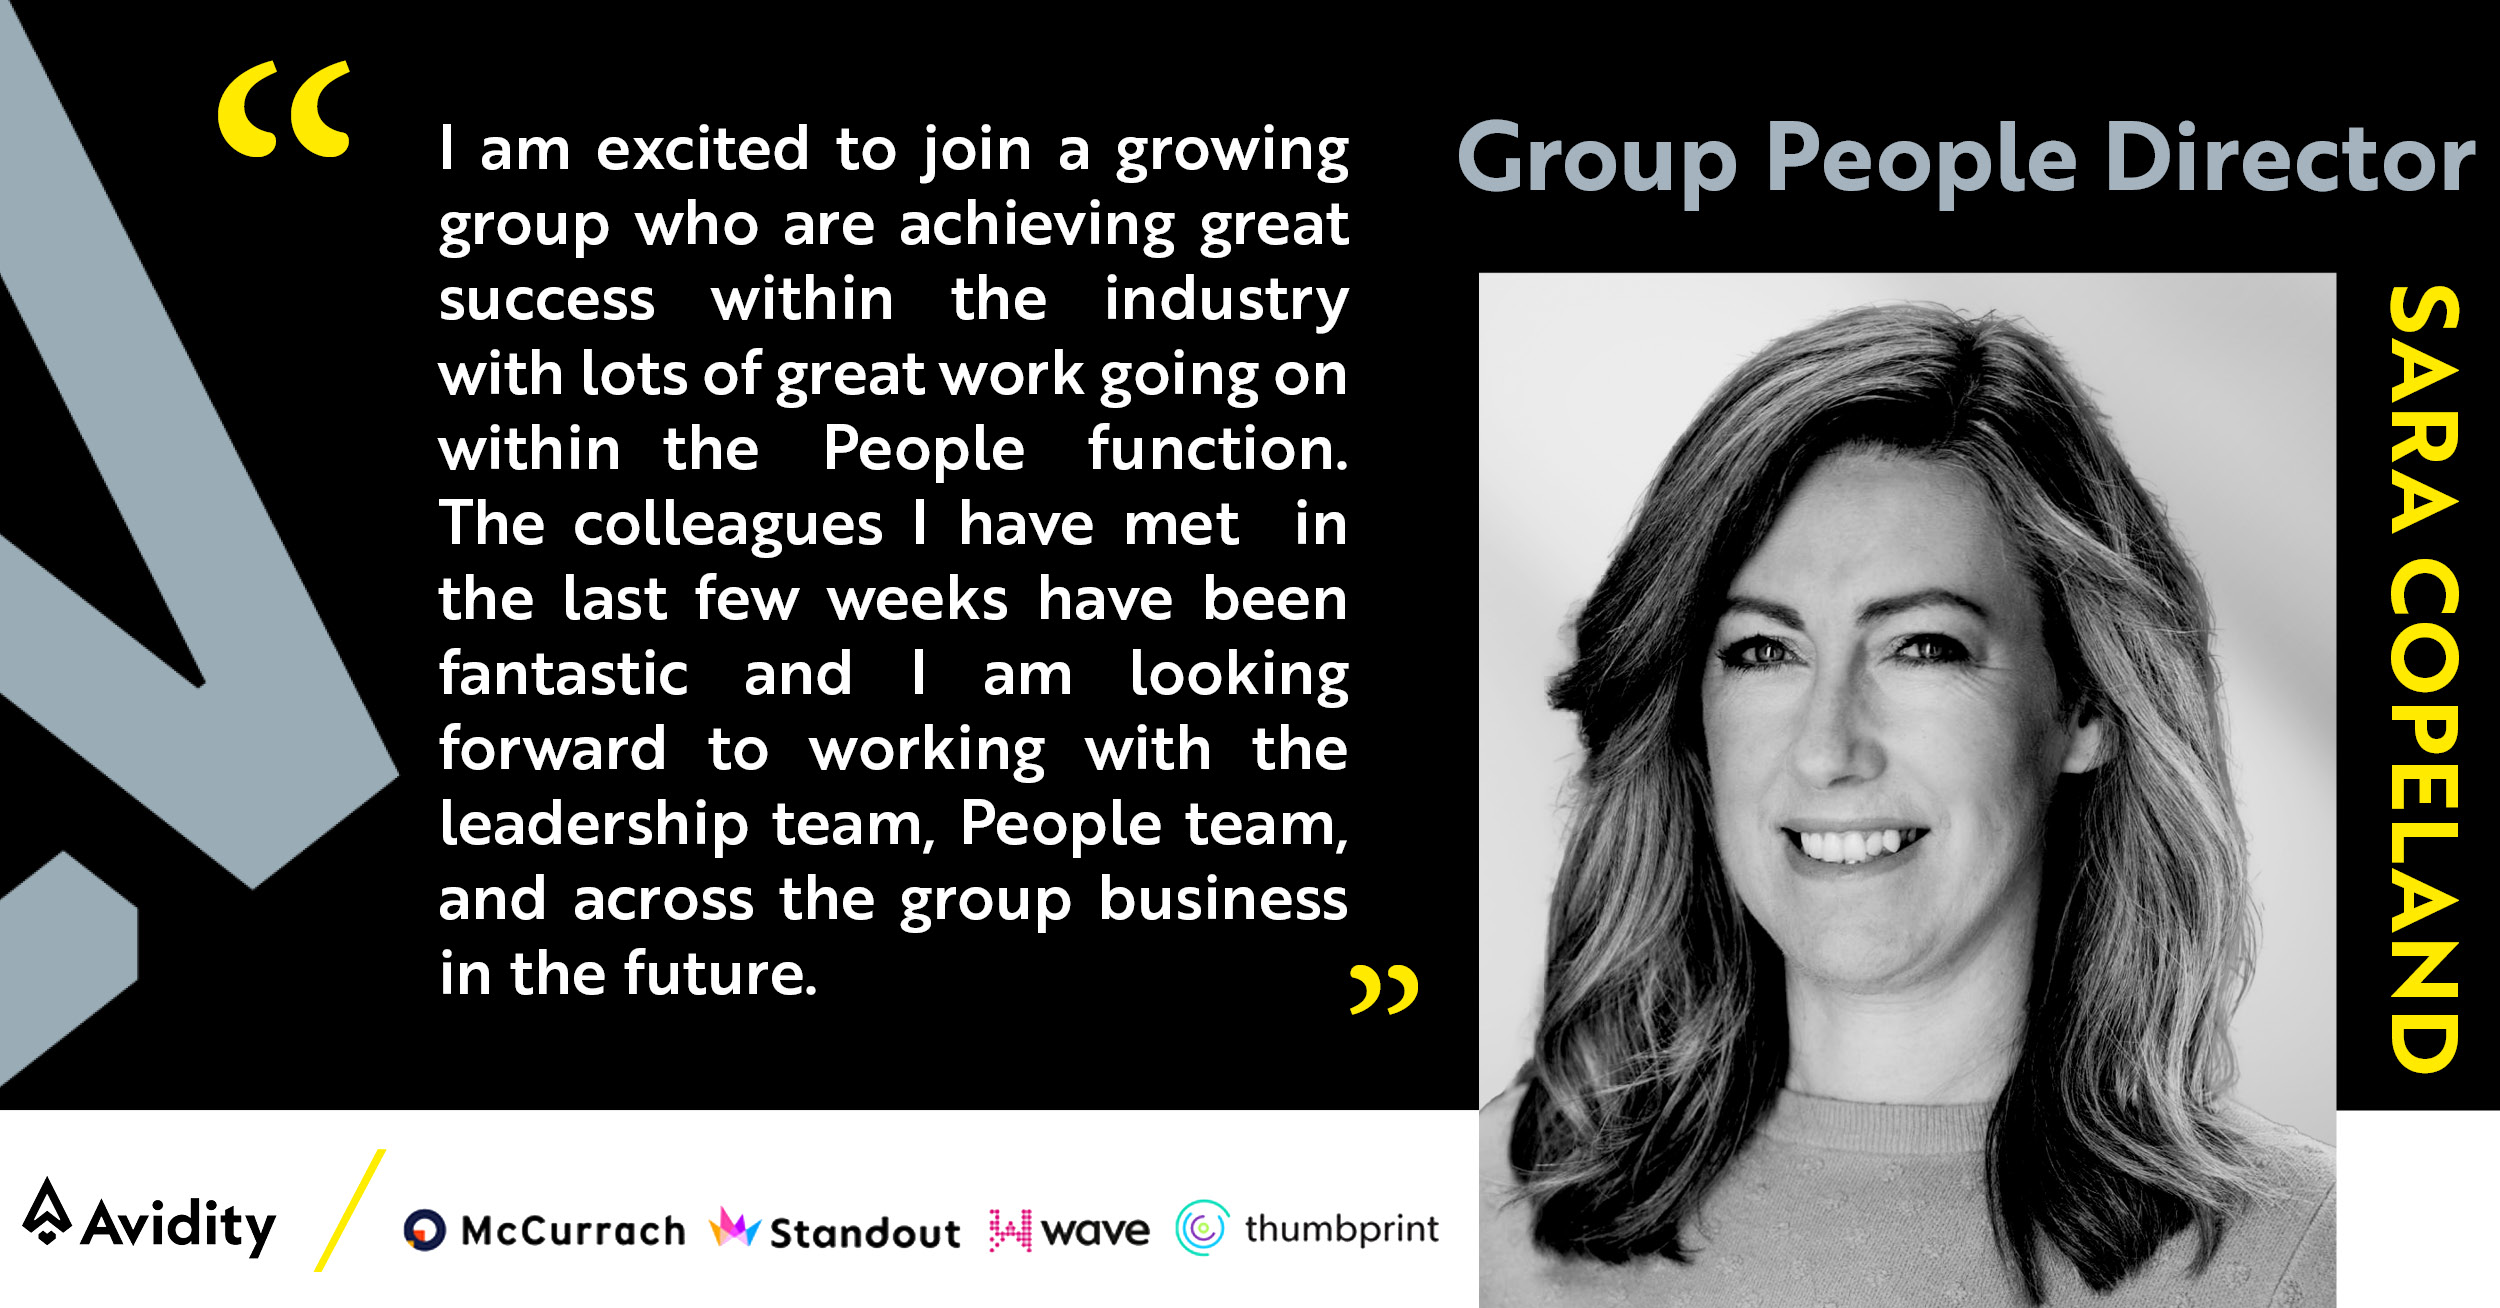 Avidity Group appoints new Group People Director, Sara Copeland